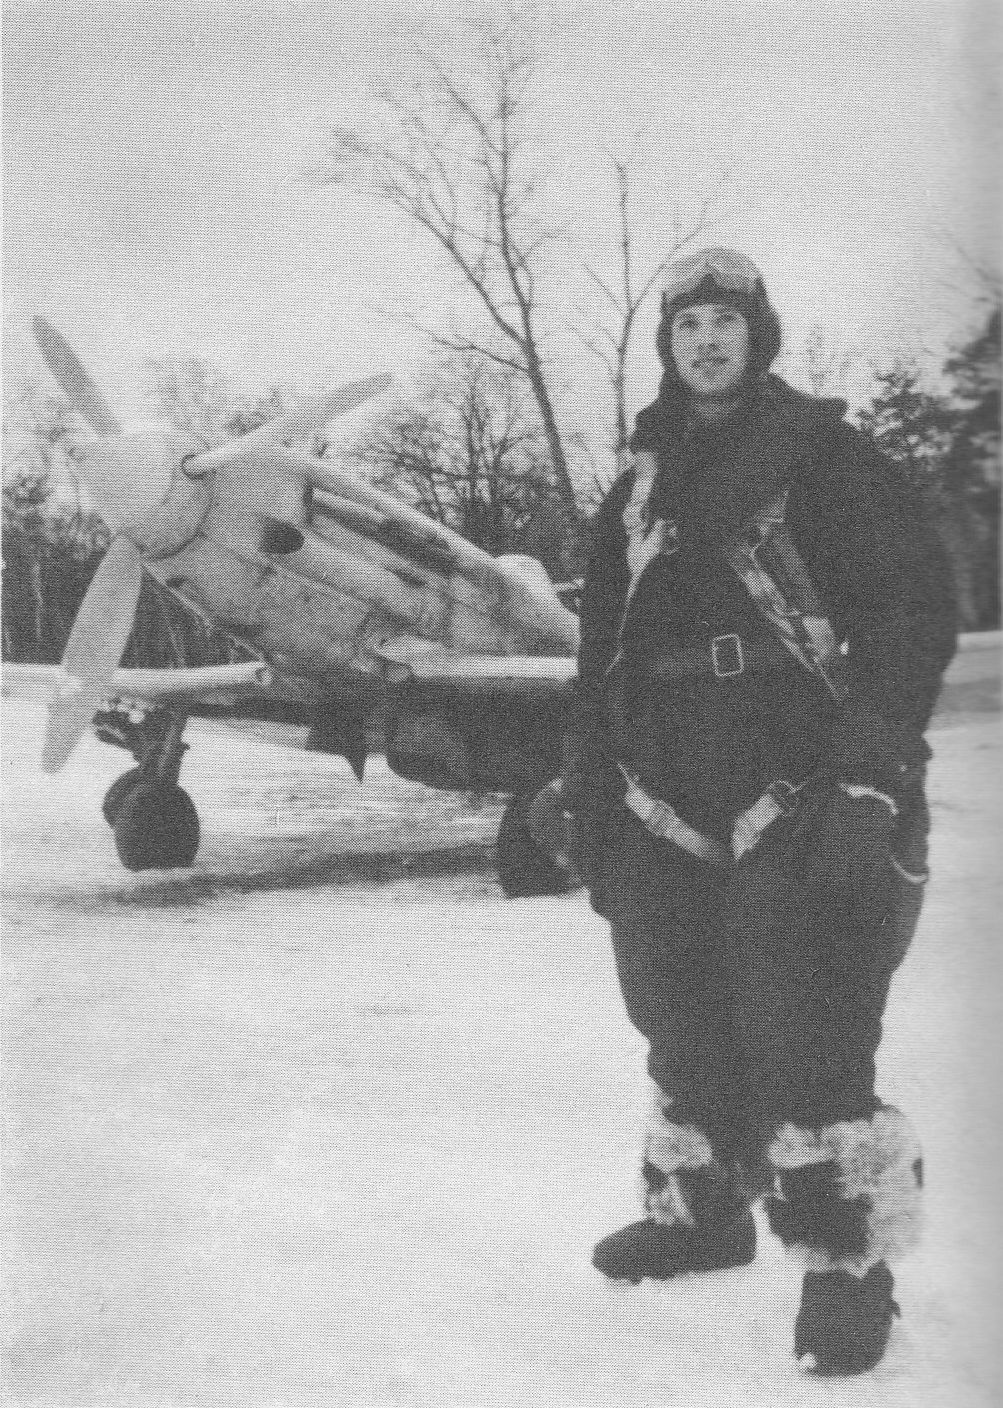 A sovet pilot of a MiG-3, Moscow front, the winter 1941/42